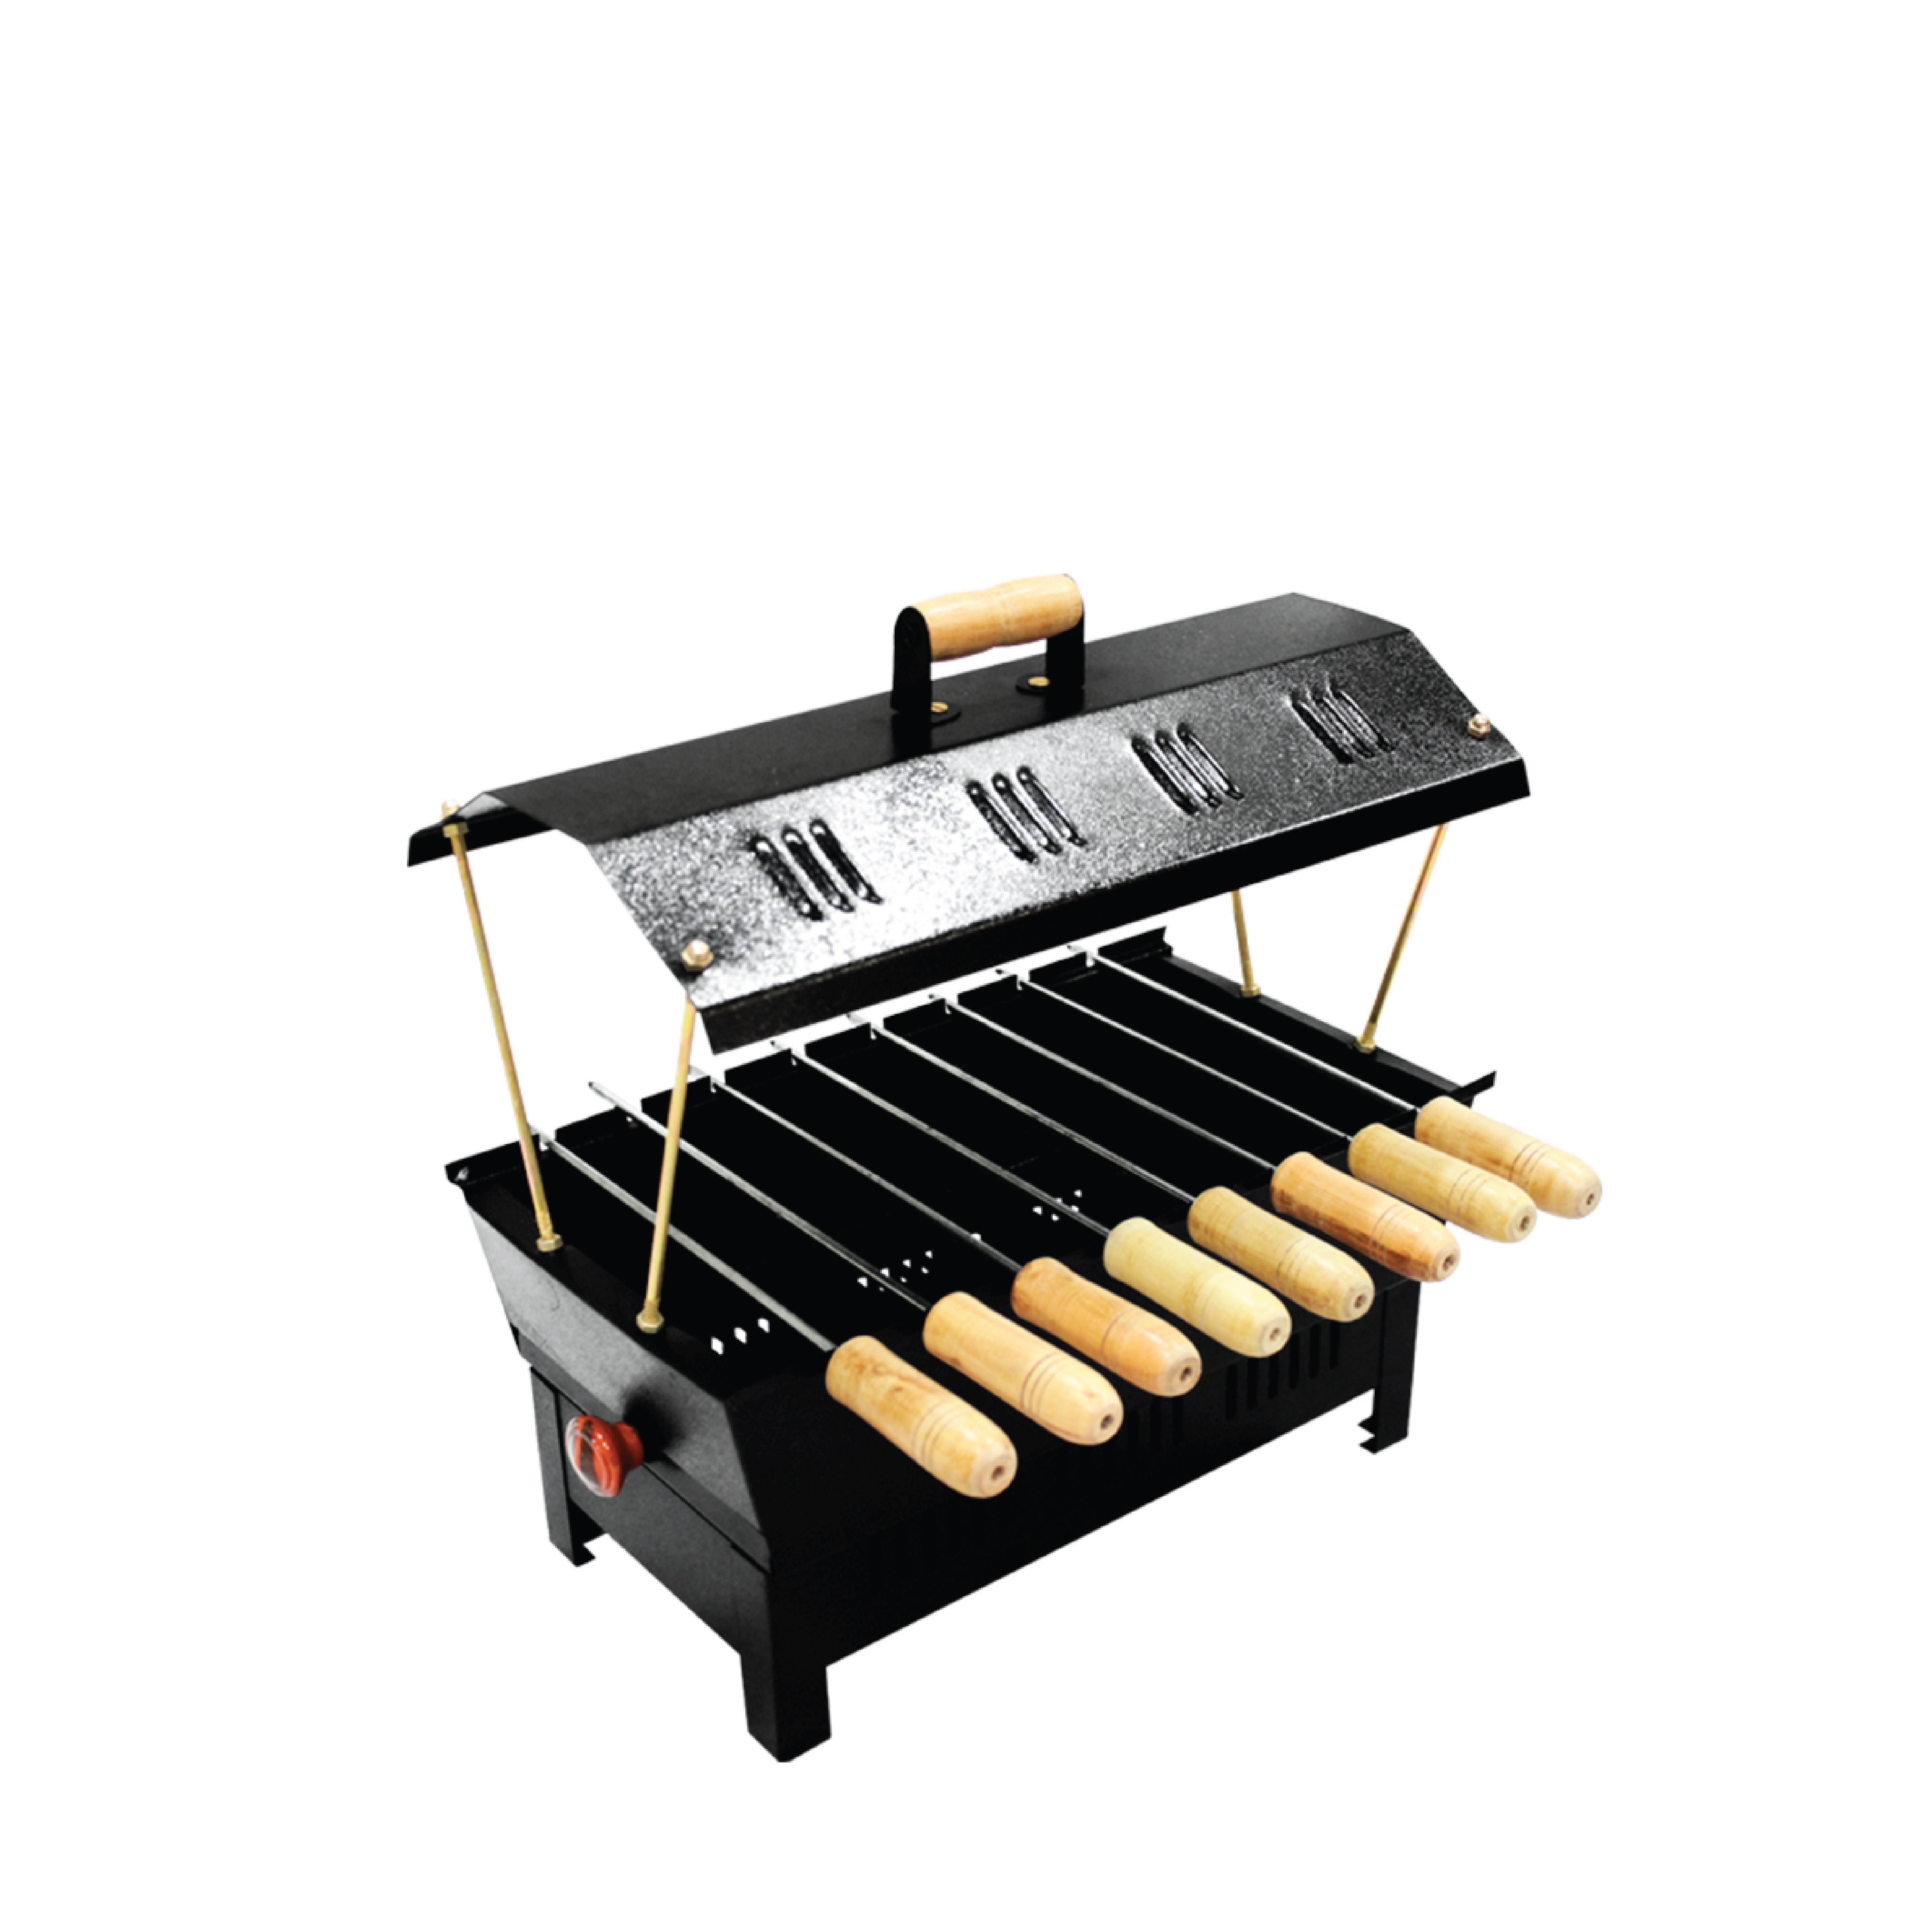 KOWS 8 skewer coal barbeque  (BBQ004)